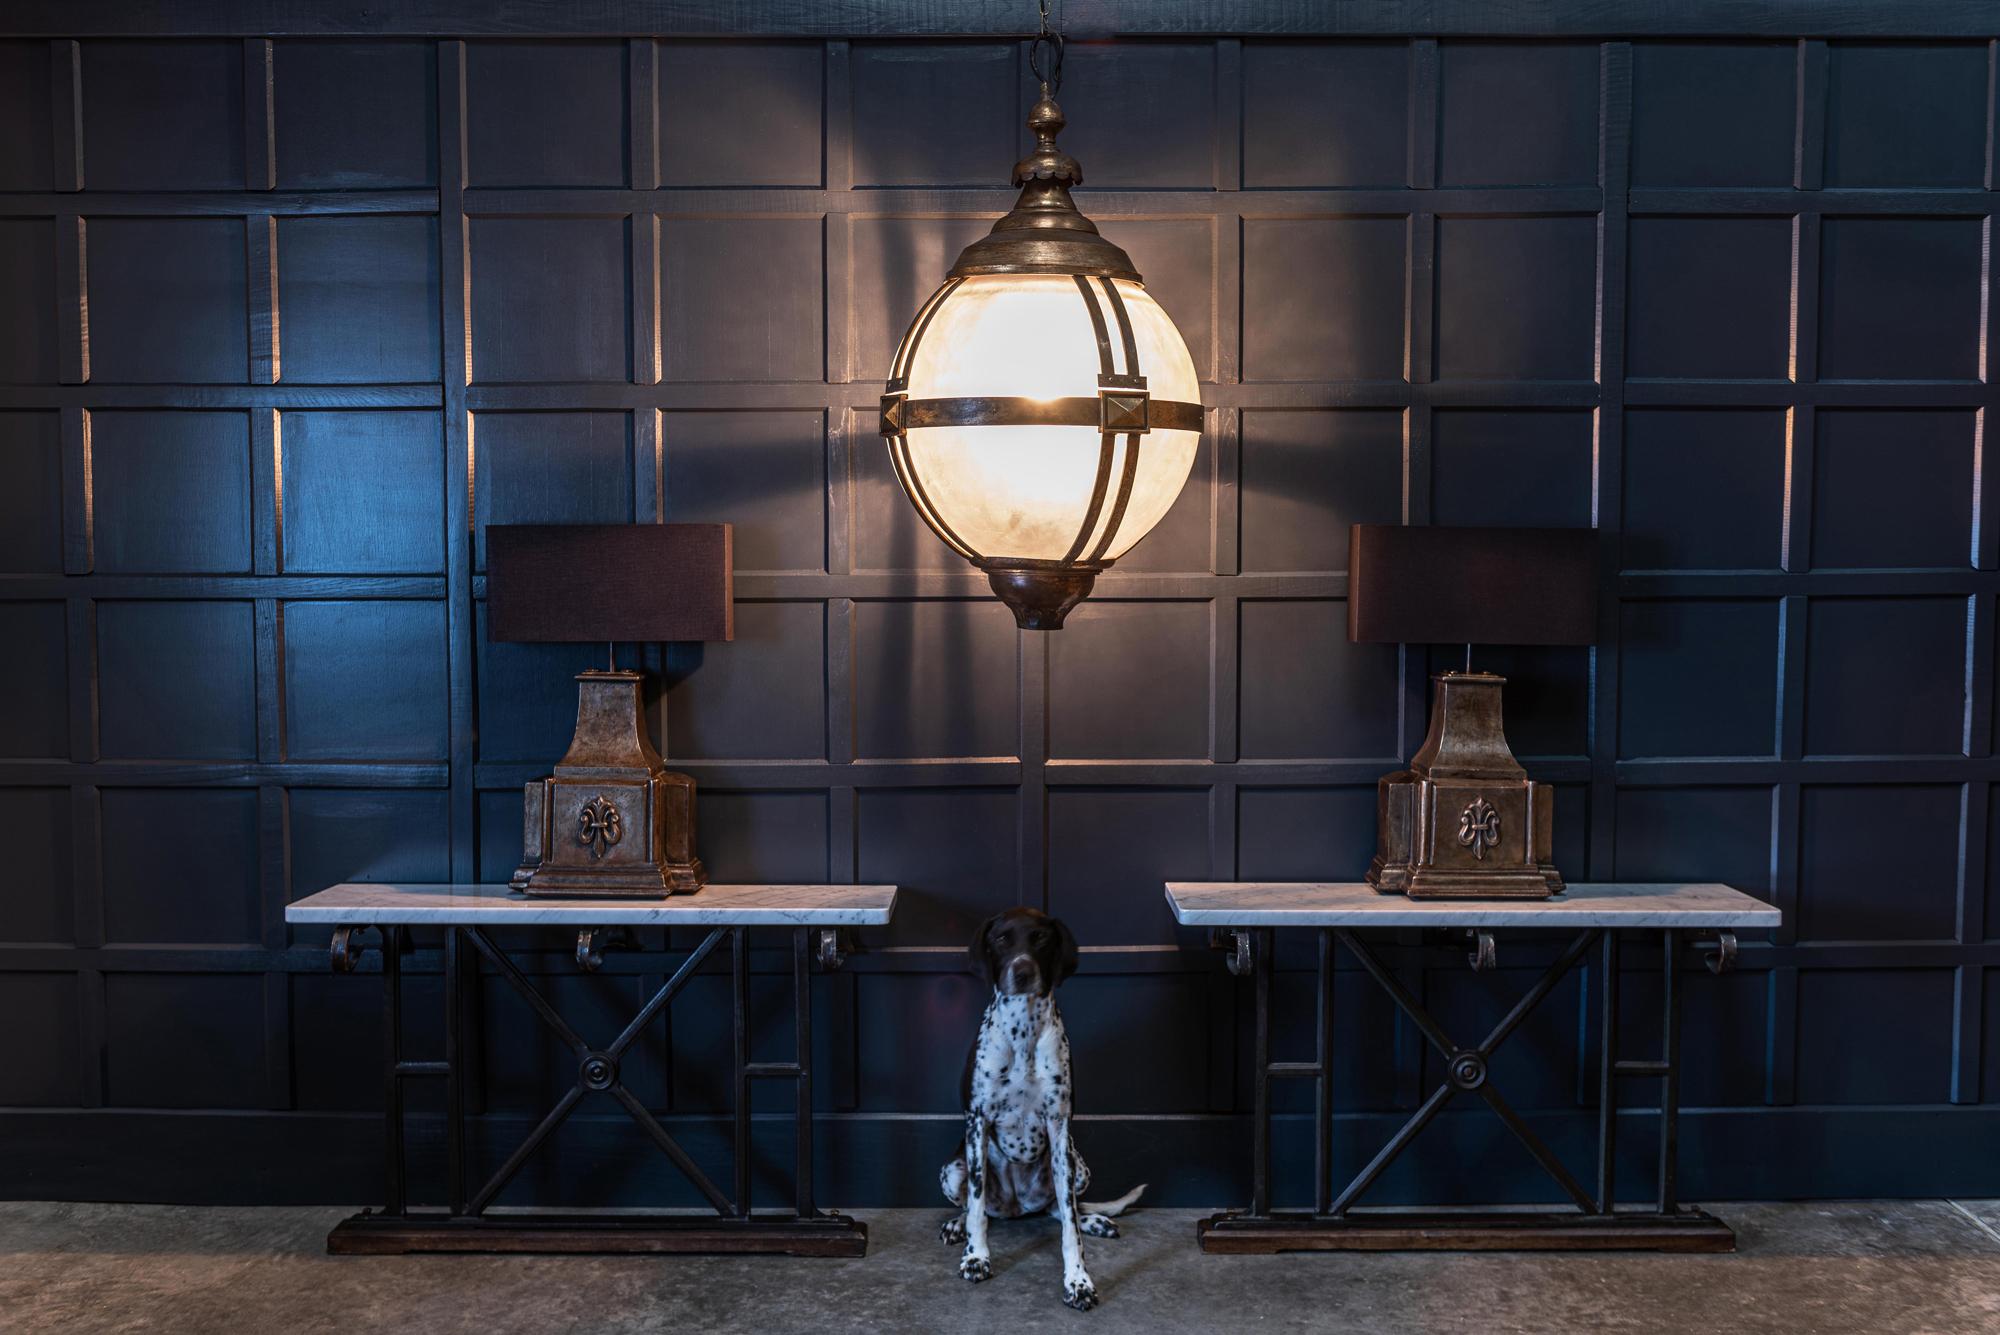 Huge London Westminster, street globe pendant lantern,
circa 1980.

Reclaimed and adapted in collaboration with our Artisan Blacksmith into a centre piece lighting pendant.

A hand forged threaded shepherds crook runs through the centre of the